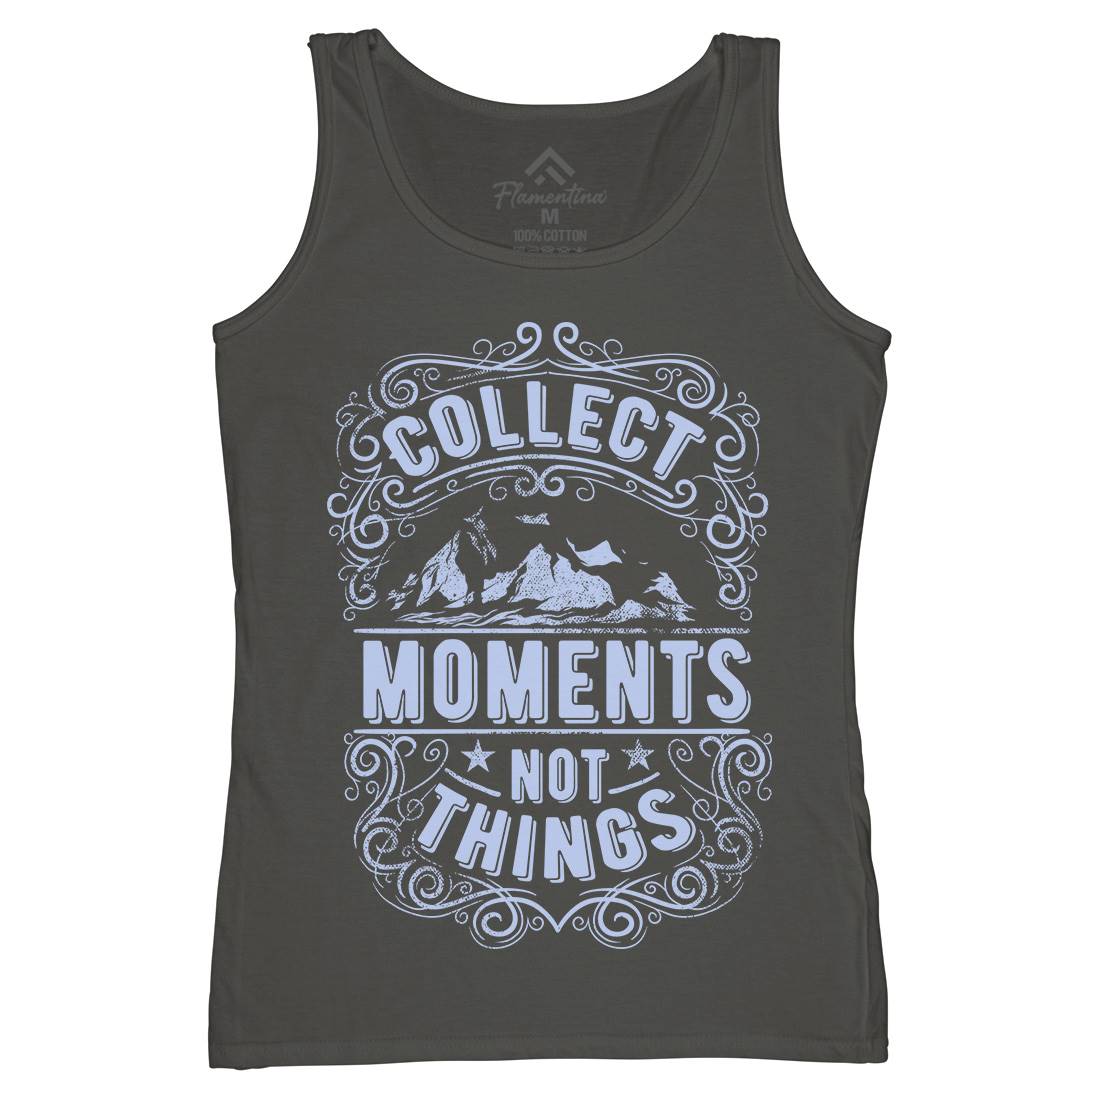 Collect Moments Not Things Womens Organic Tank Top Vest Quotes C918